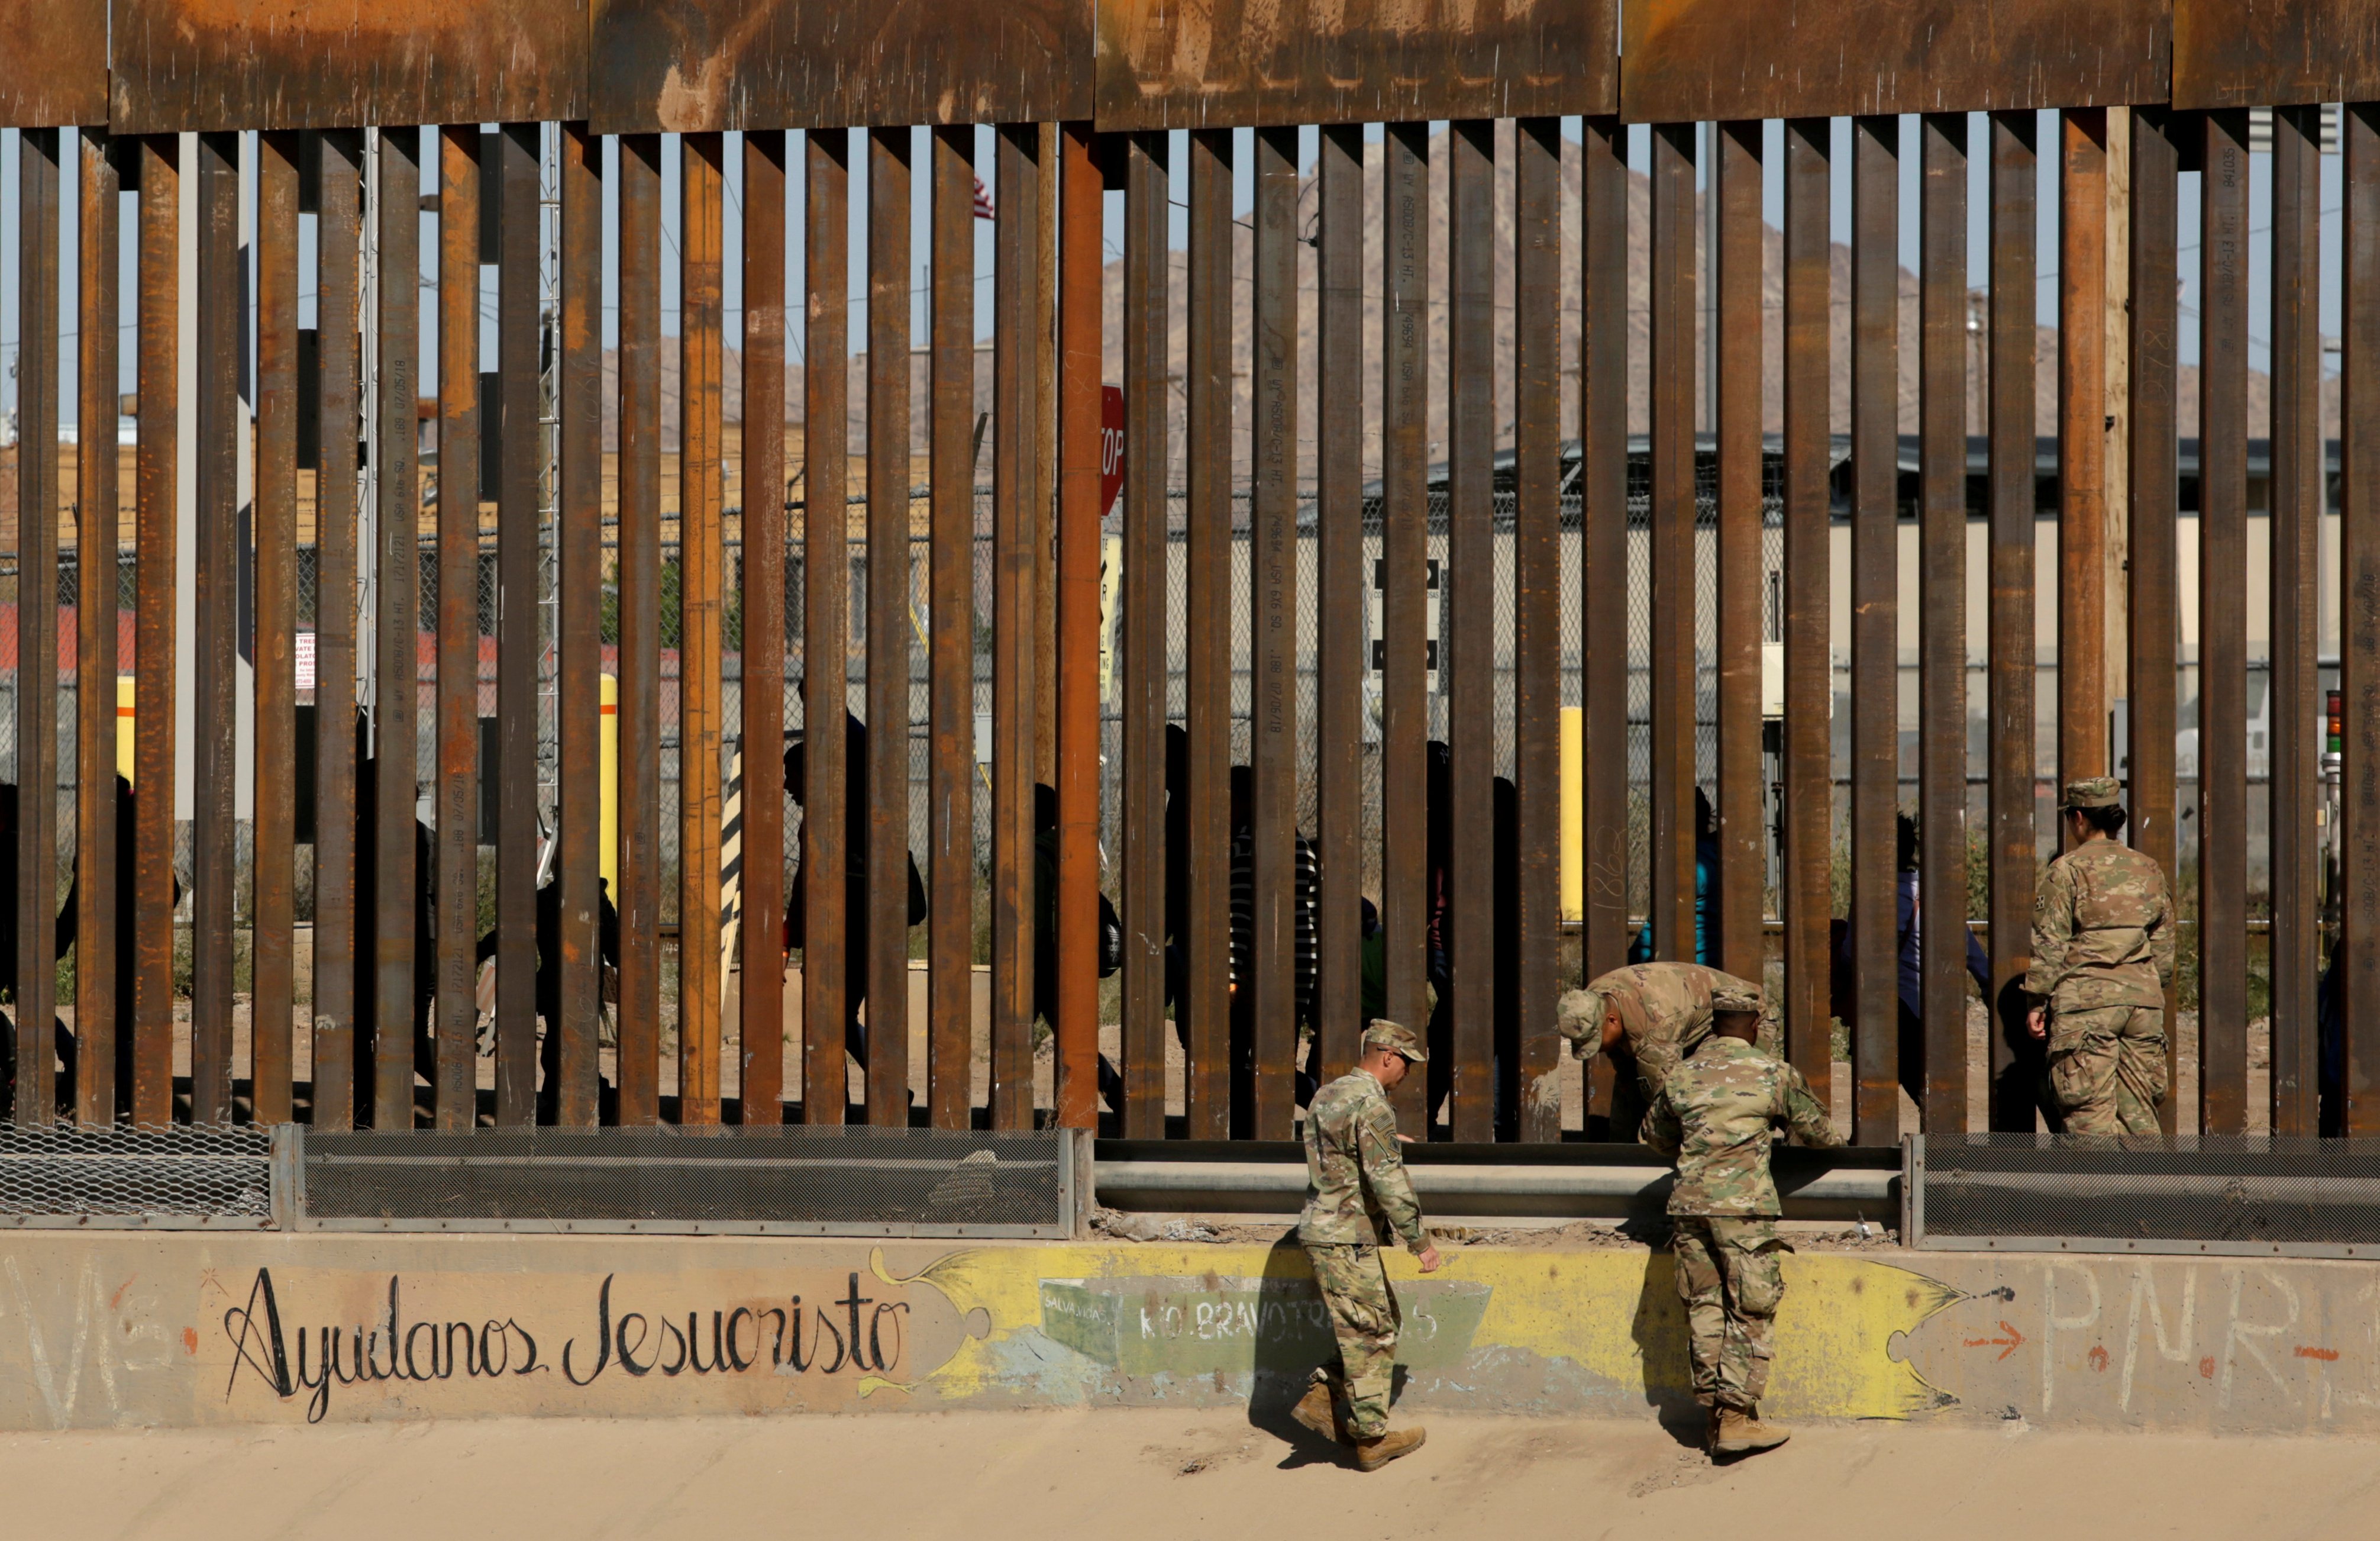 U.S. soldiers walk next to the border fence between Mexico and the United States, as migrants are seen walking behind the fence, after crossing illegally into the U.S. to turn themselves in, in El Paso, Texas, U.S., in this picture taken from Ciudad Juarez